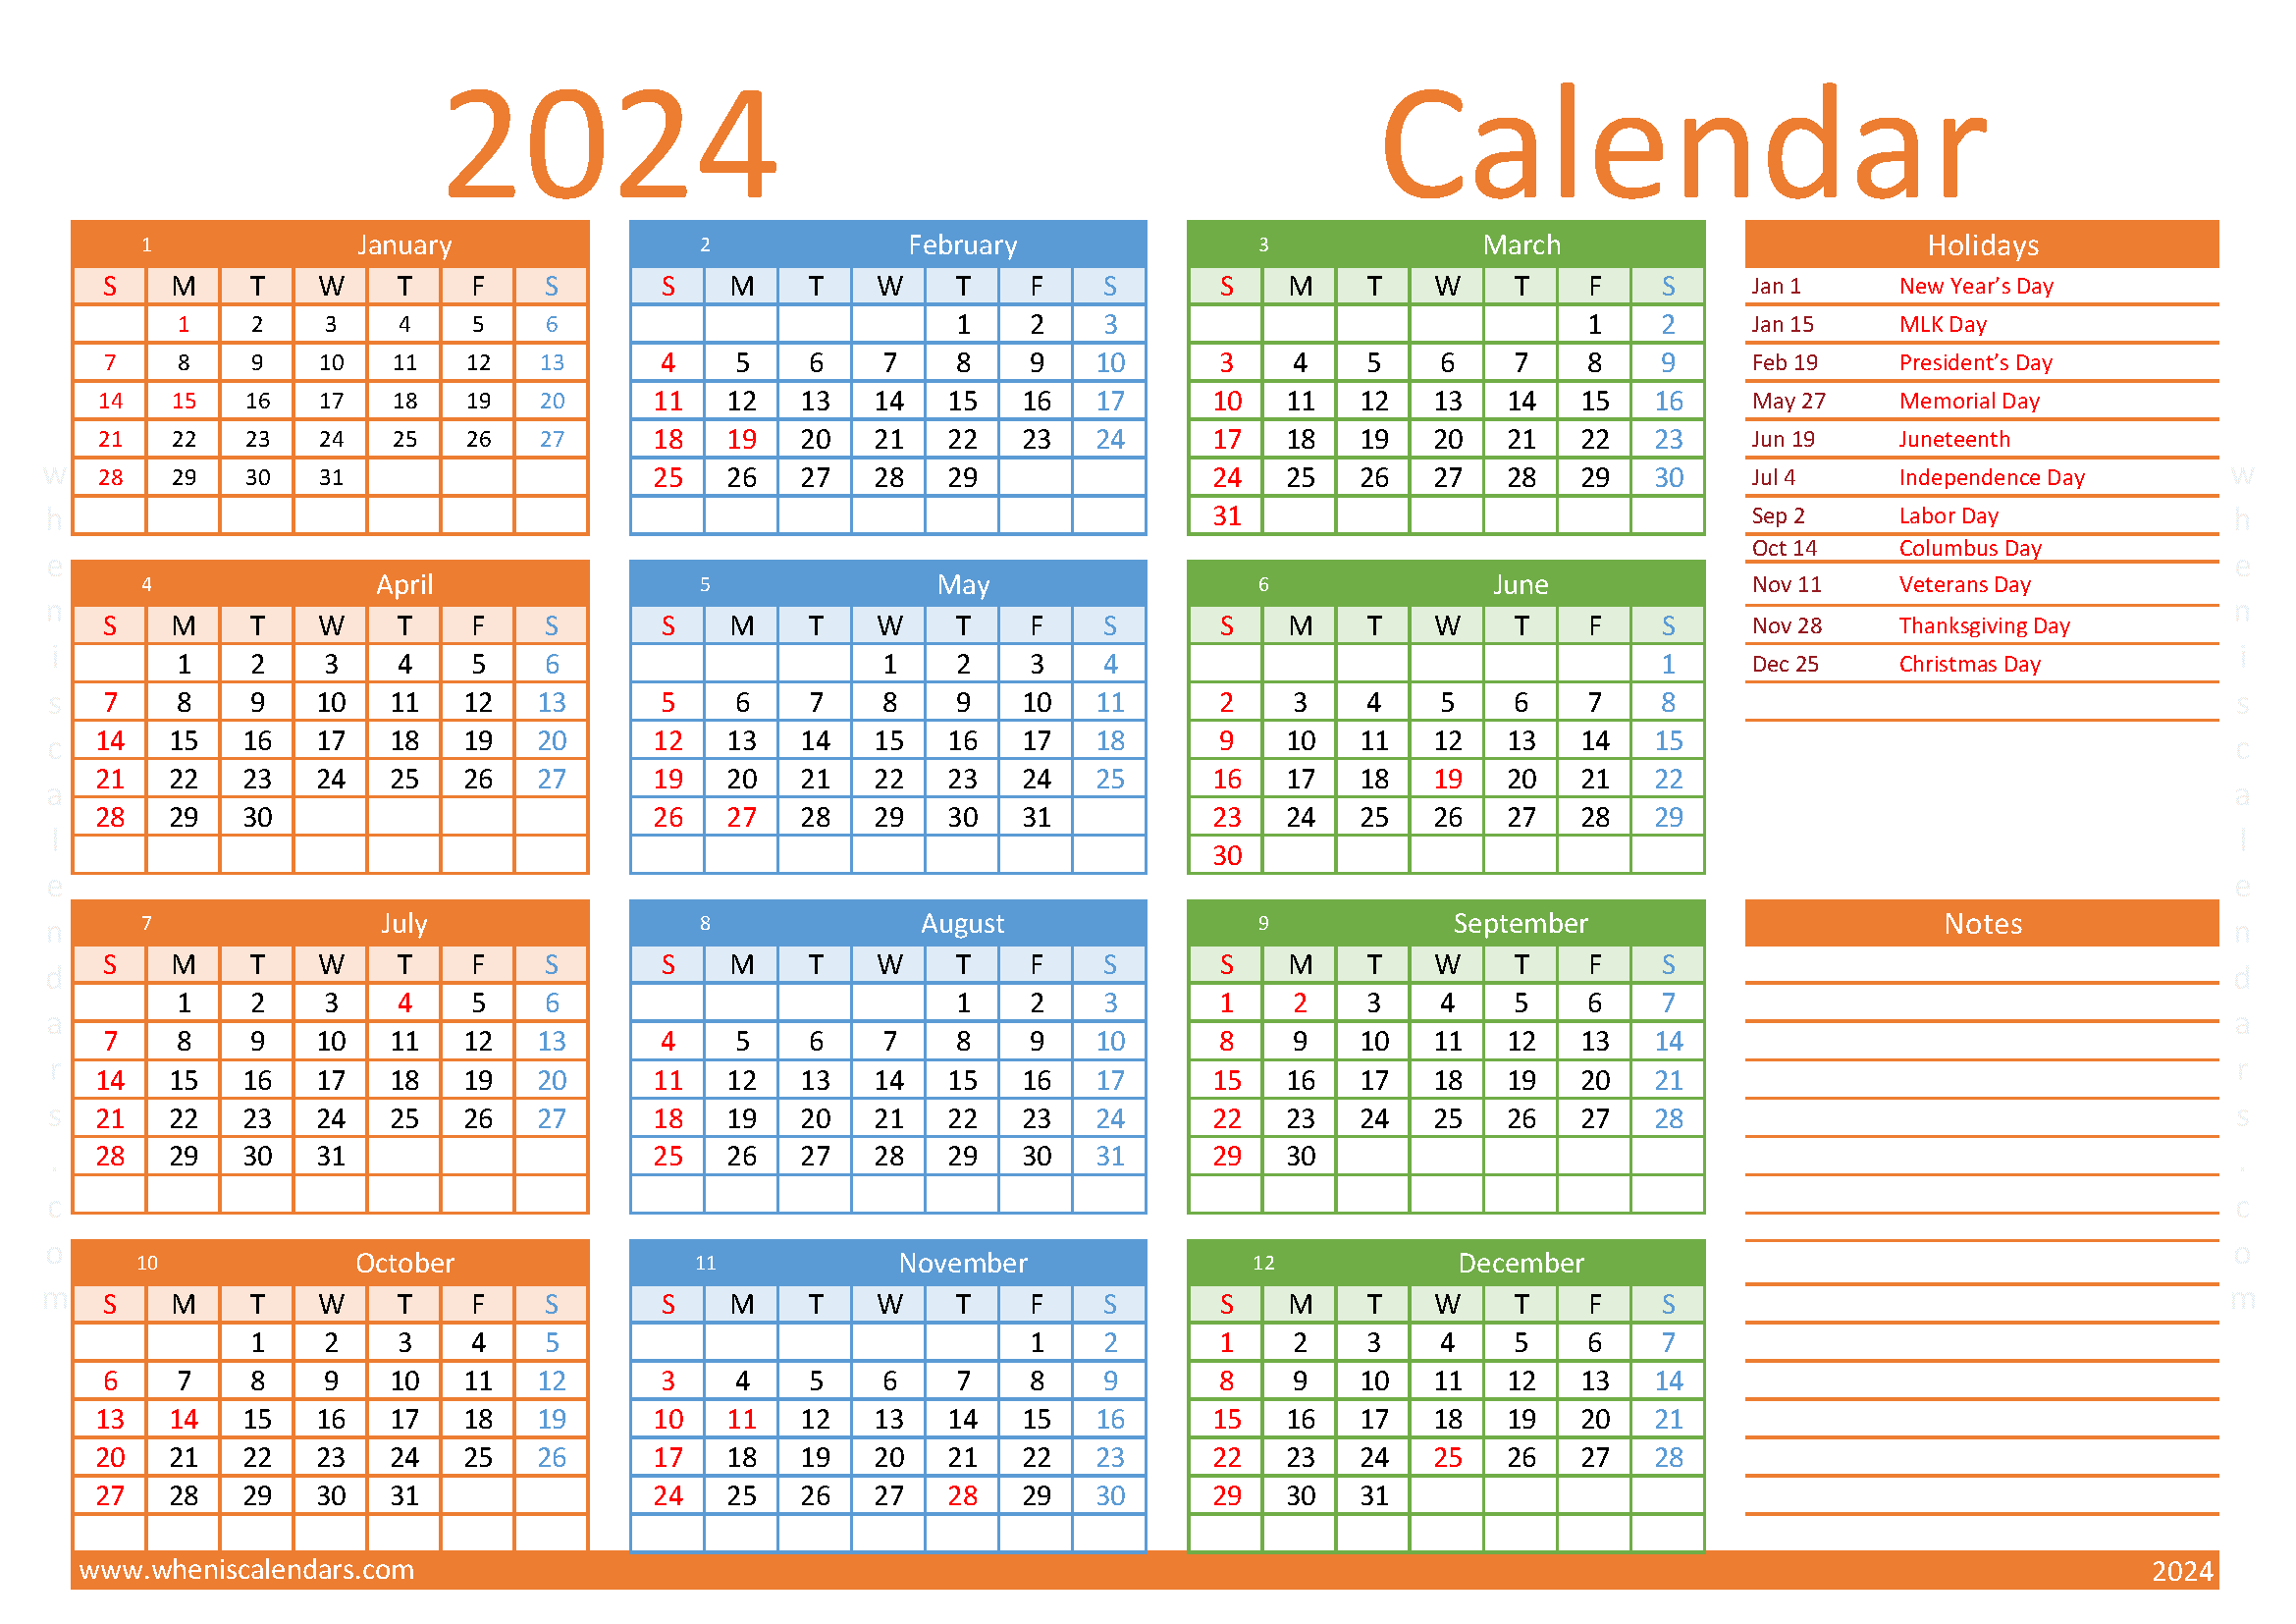 Download free printable calendar 2024 with holidays A4 O24Y186